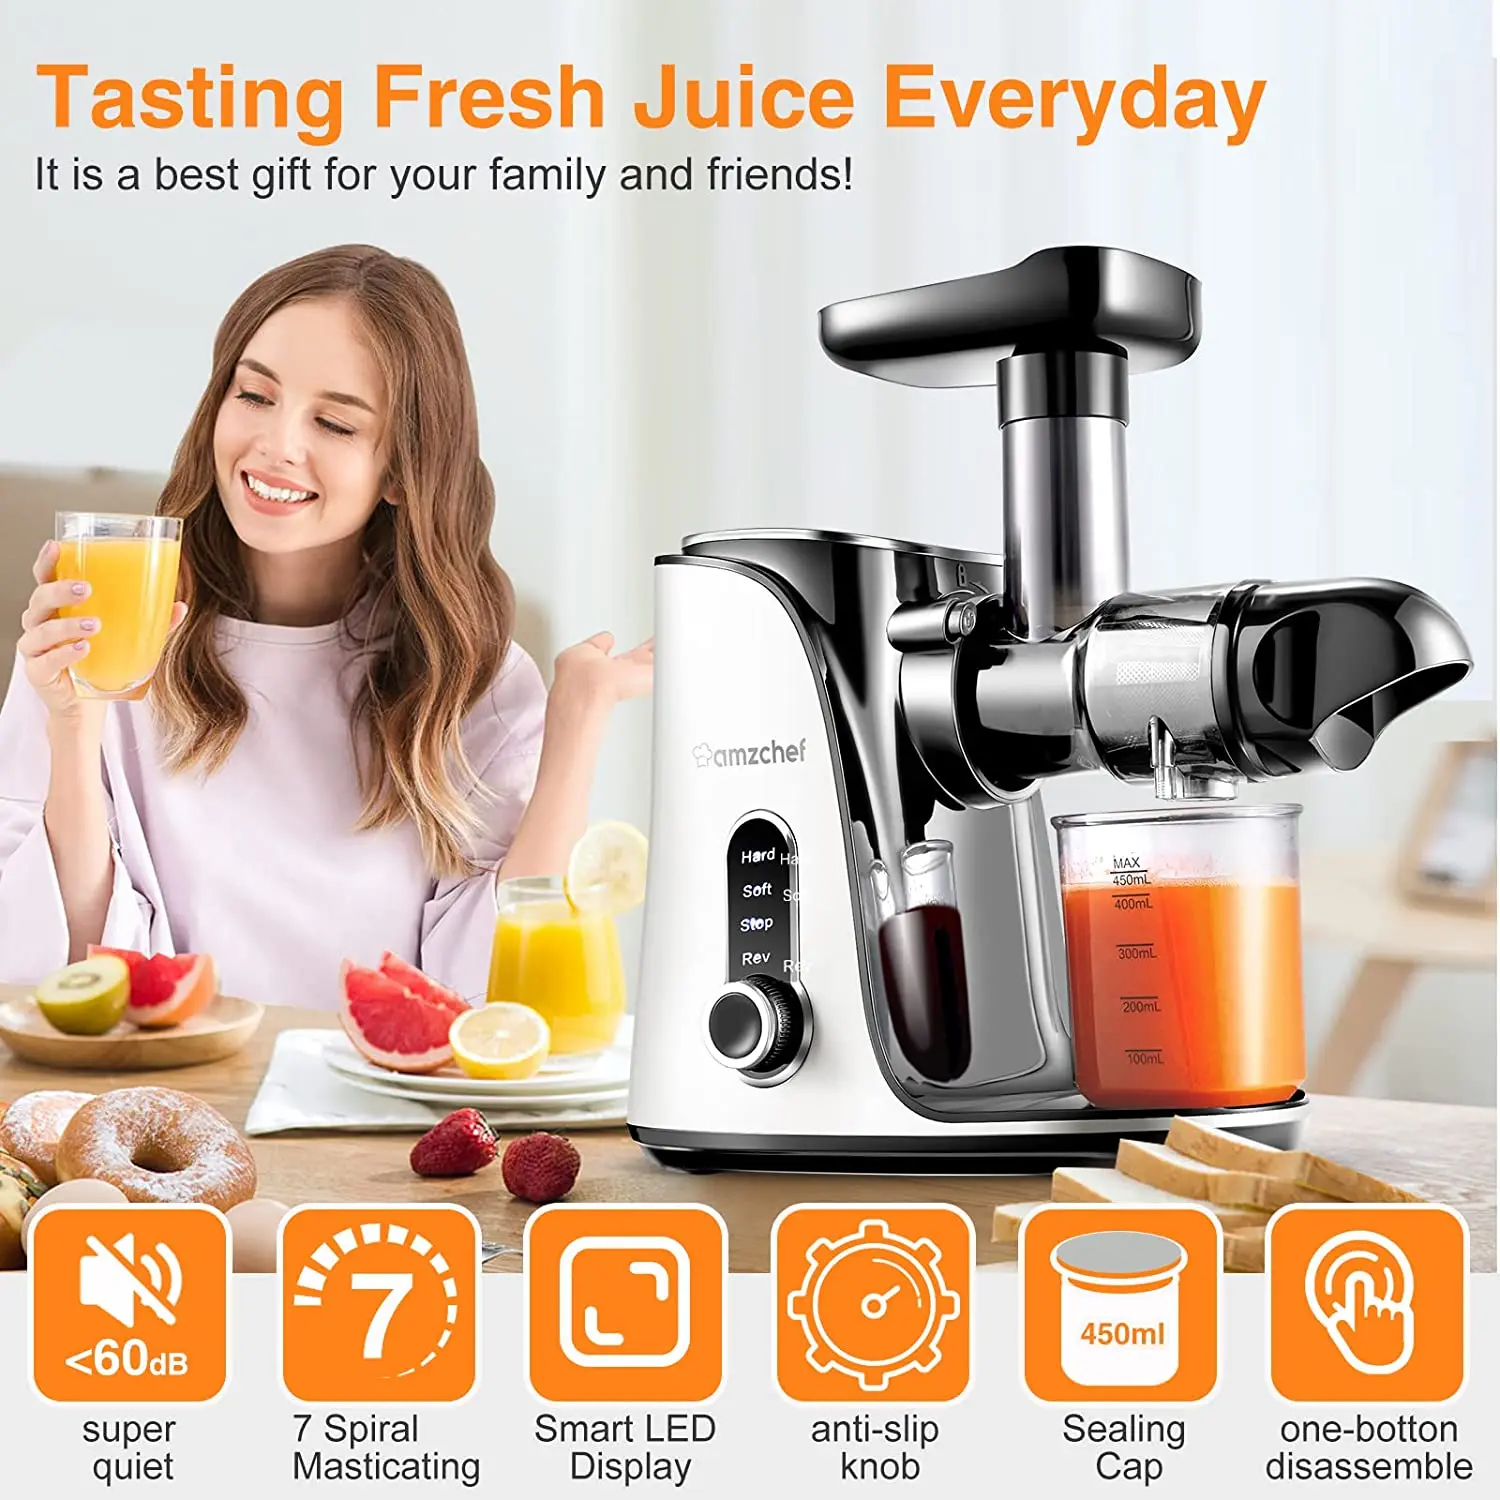 AMZCHEF Slow Masticating Juicer Slow Juicer Extractor Professional Machine Cold Press Juicer with Quiet Motor/Reverse Function images - 6